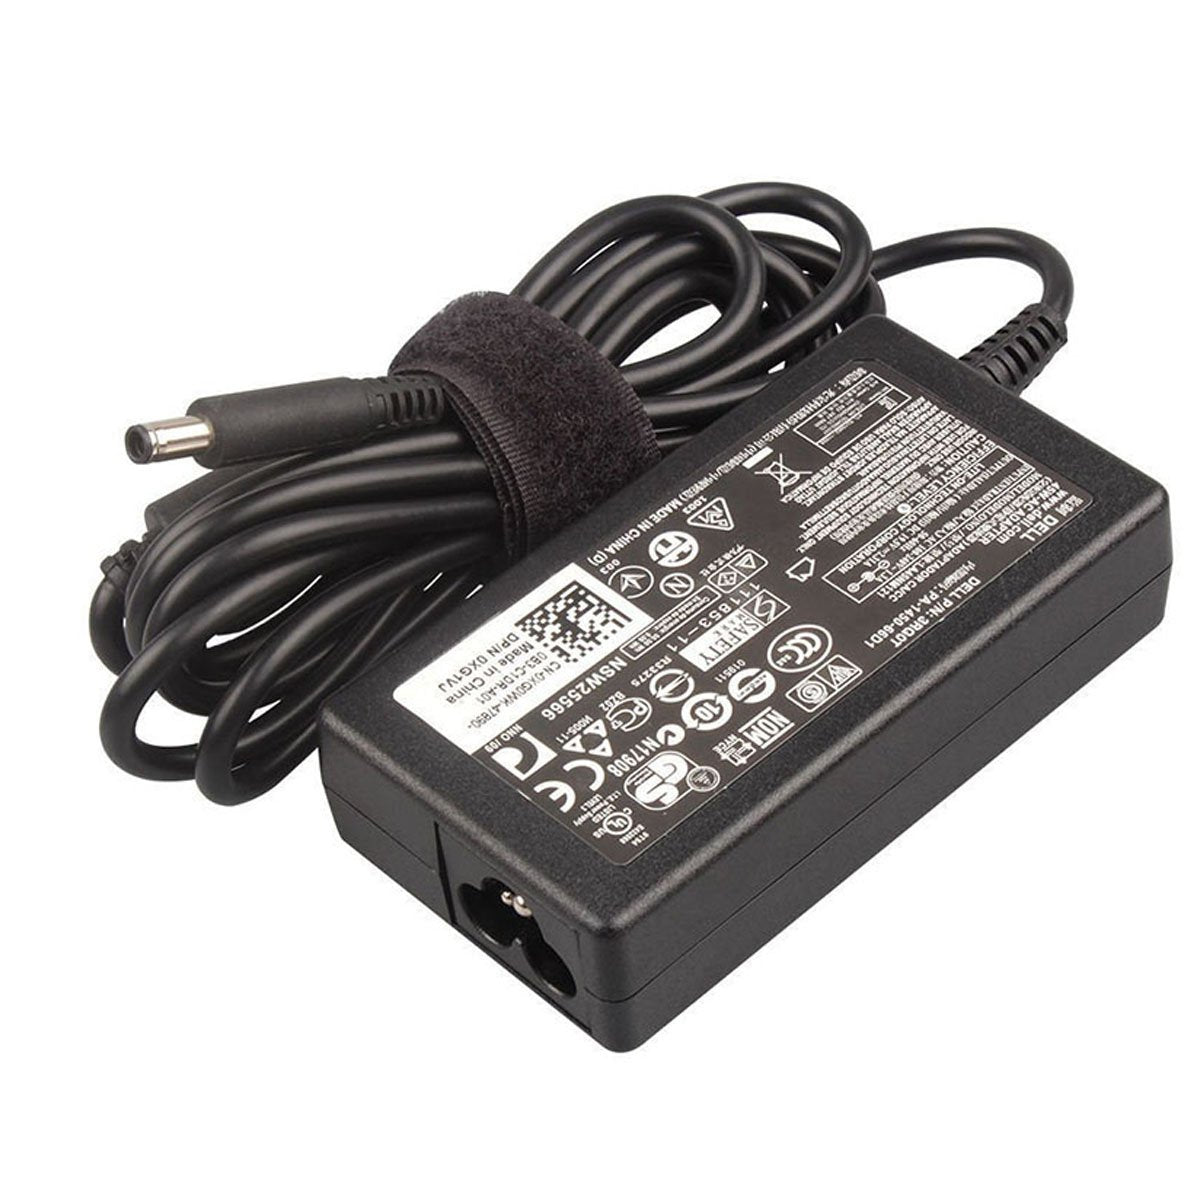 Dell XPS 13 9360 Original 45W Pin Laptop Charger Adapter With Power Cord 19.5V 4.5mm